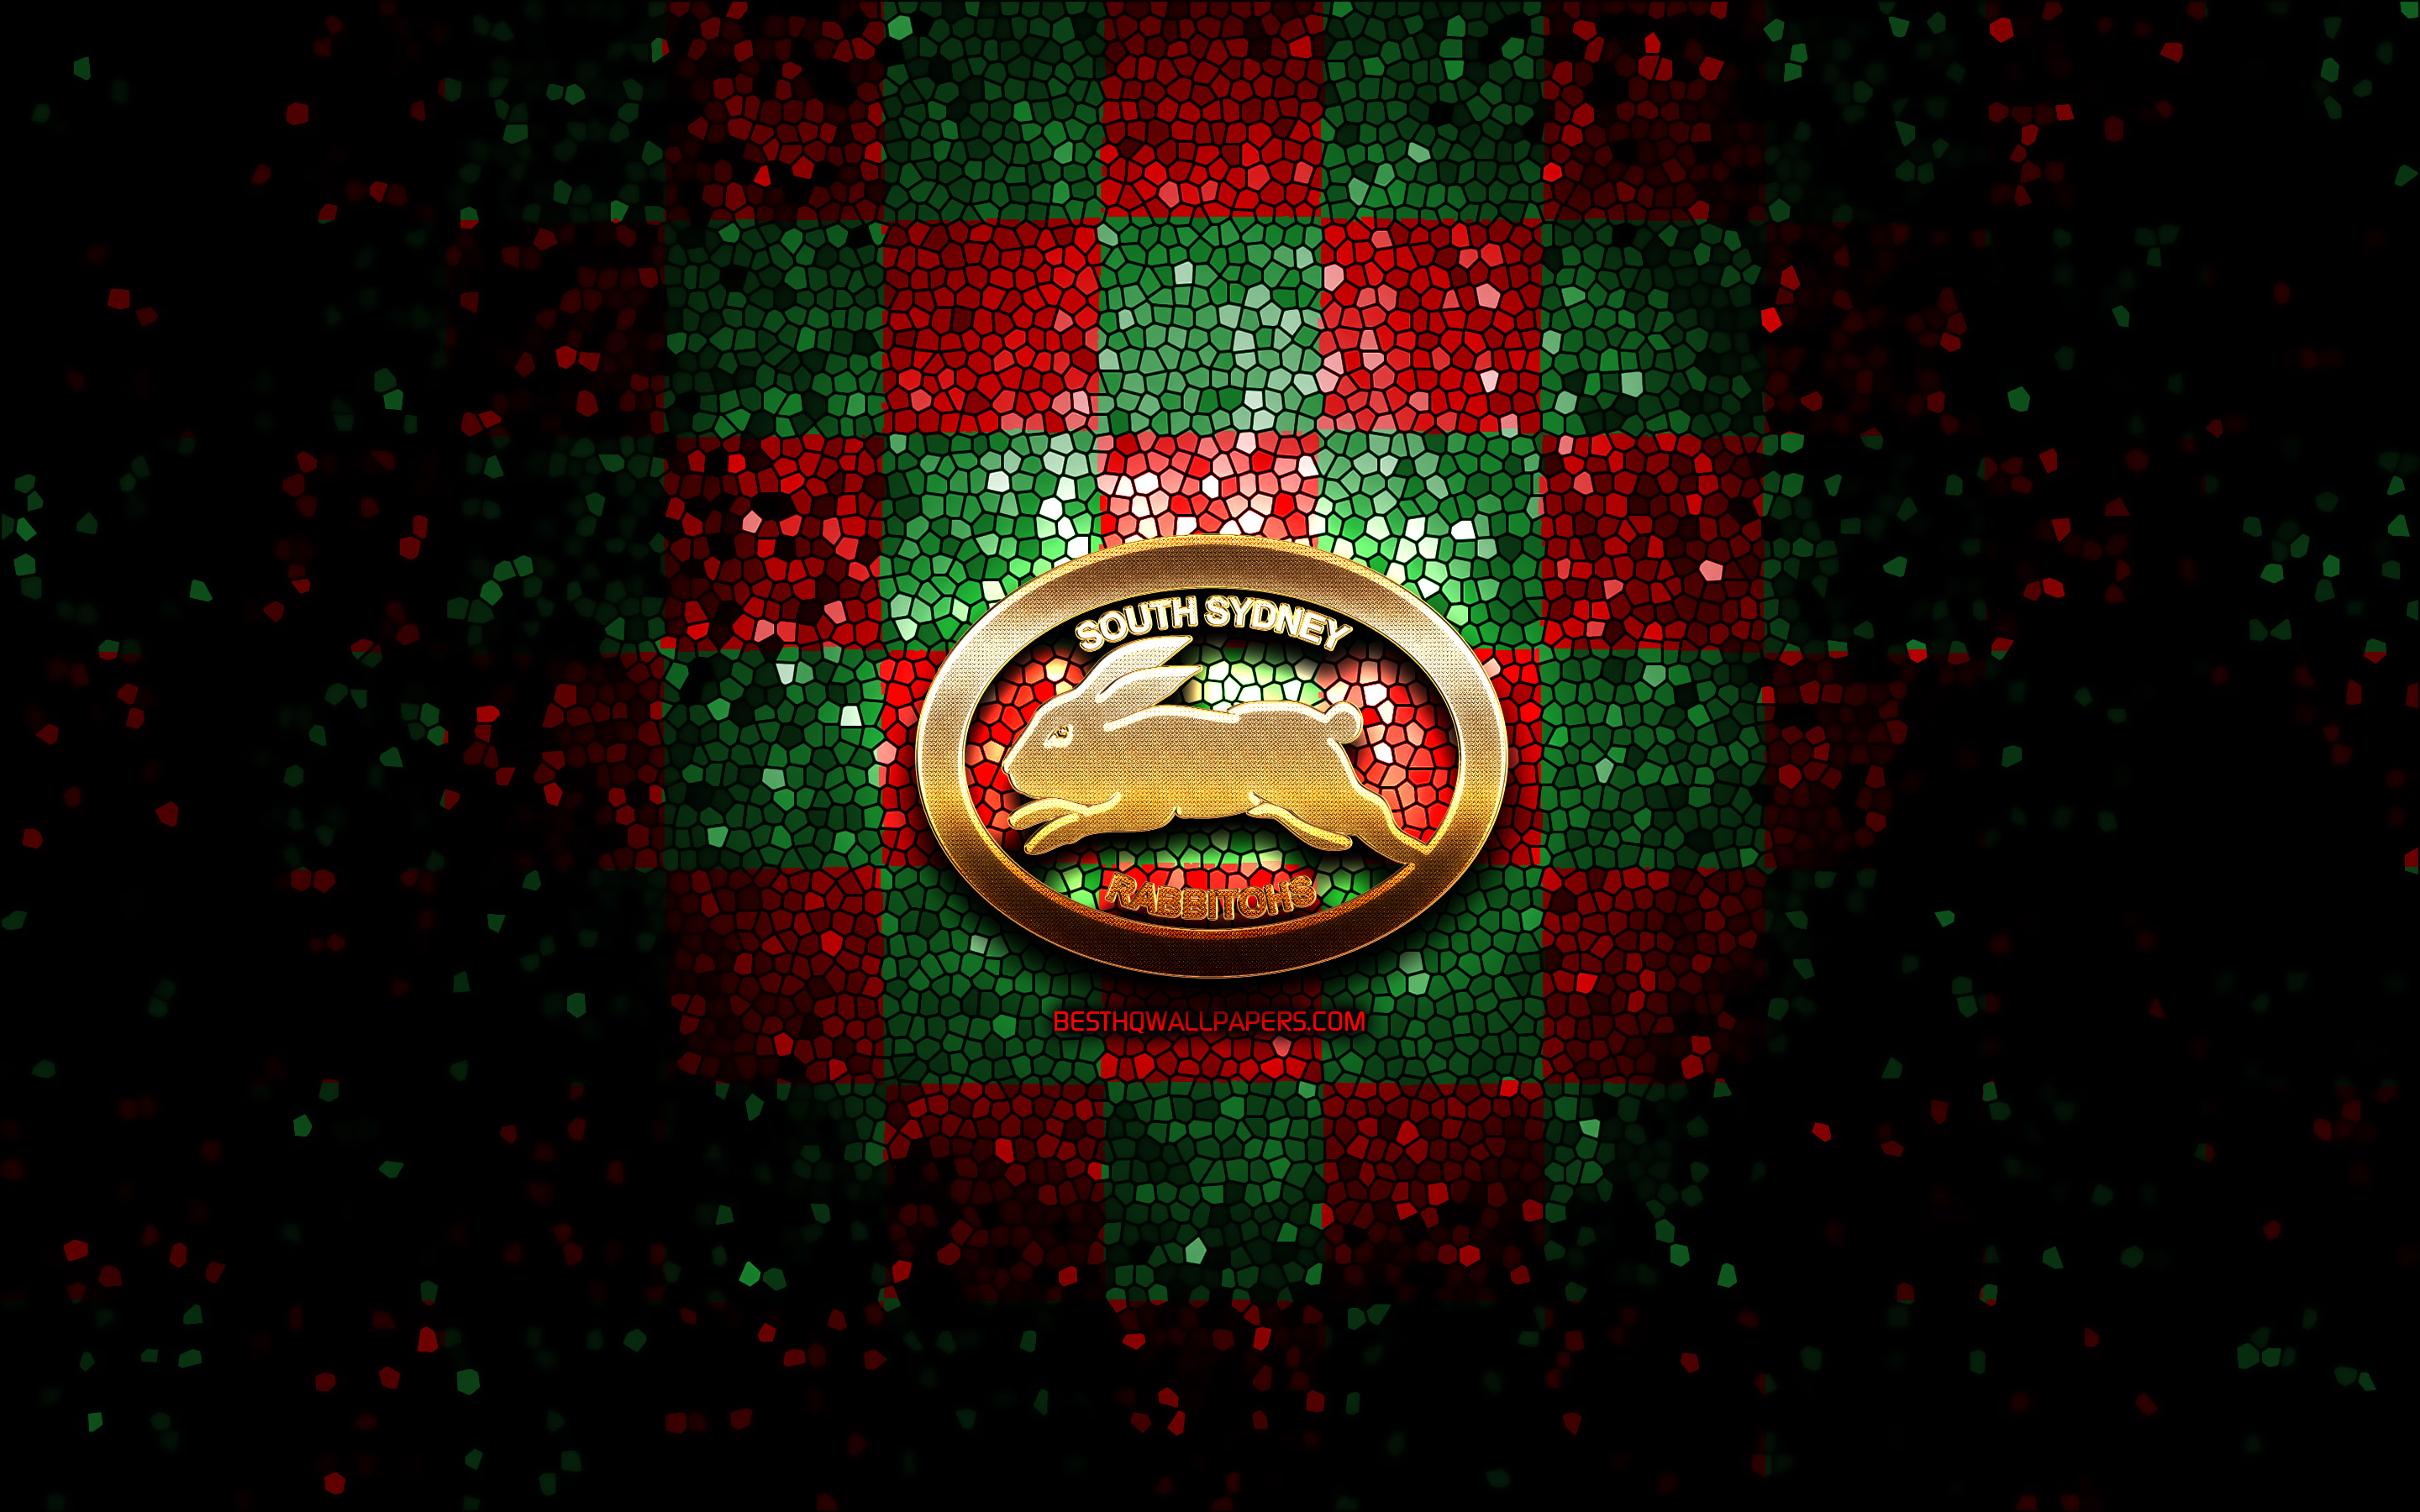 Download wallpapers South Sydney Rabbitohs glitter logo NRL red